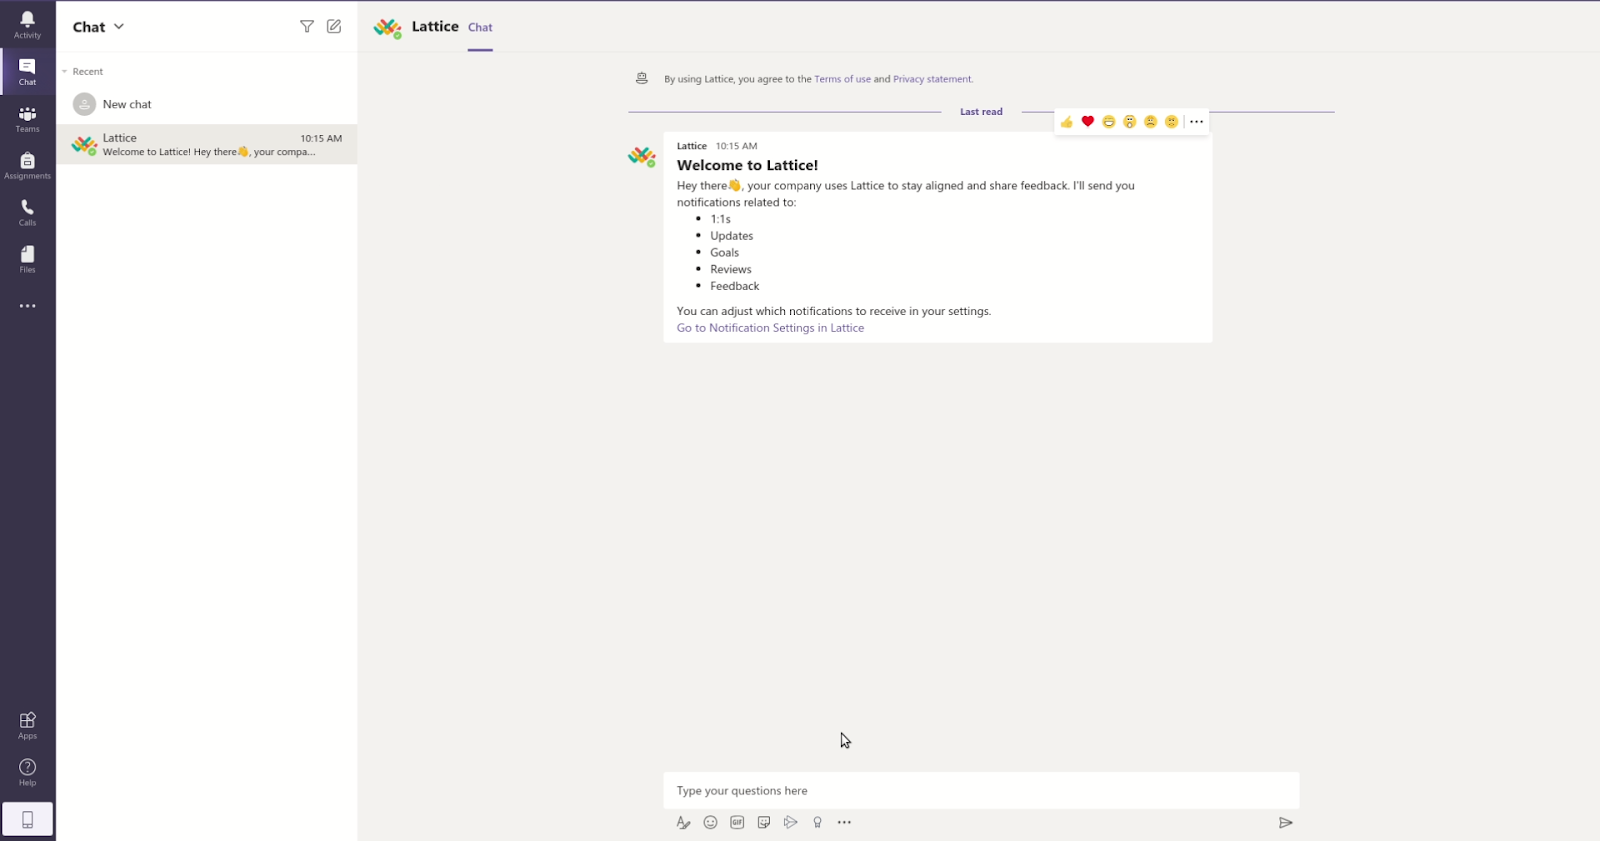 Screenshot of Microsoft Teams chat with Lattice app saying 'Welcome to Lattice!'